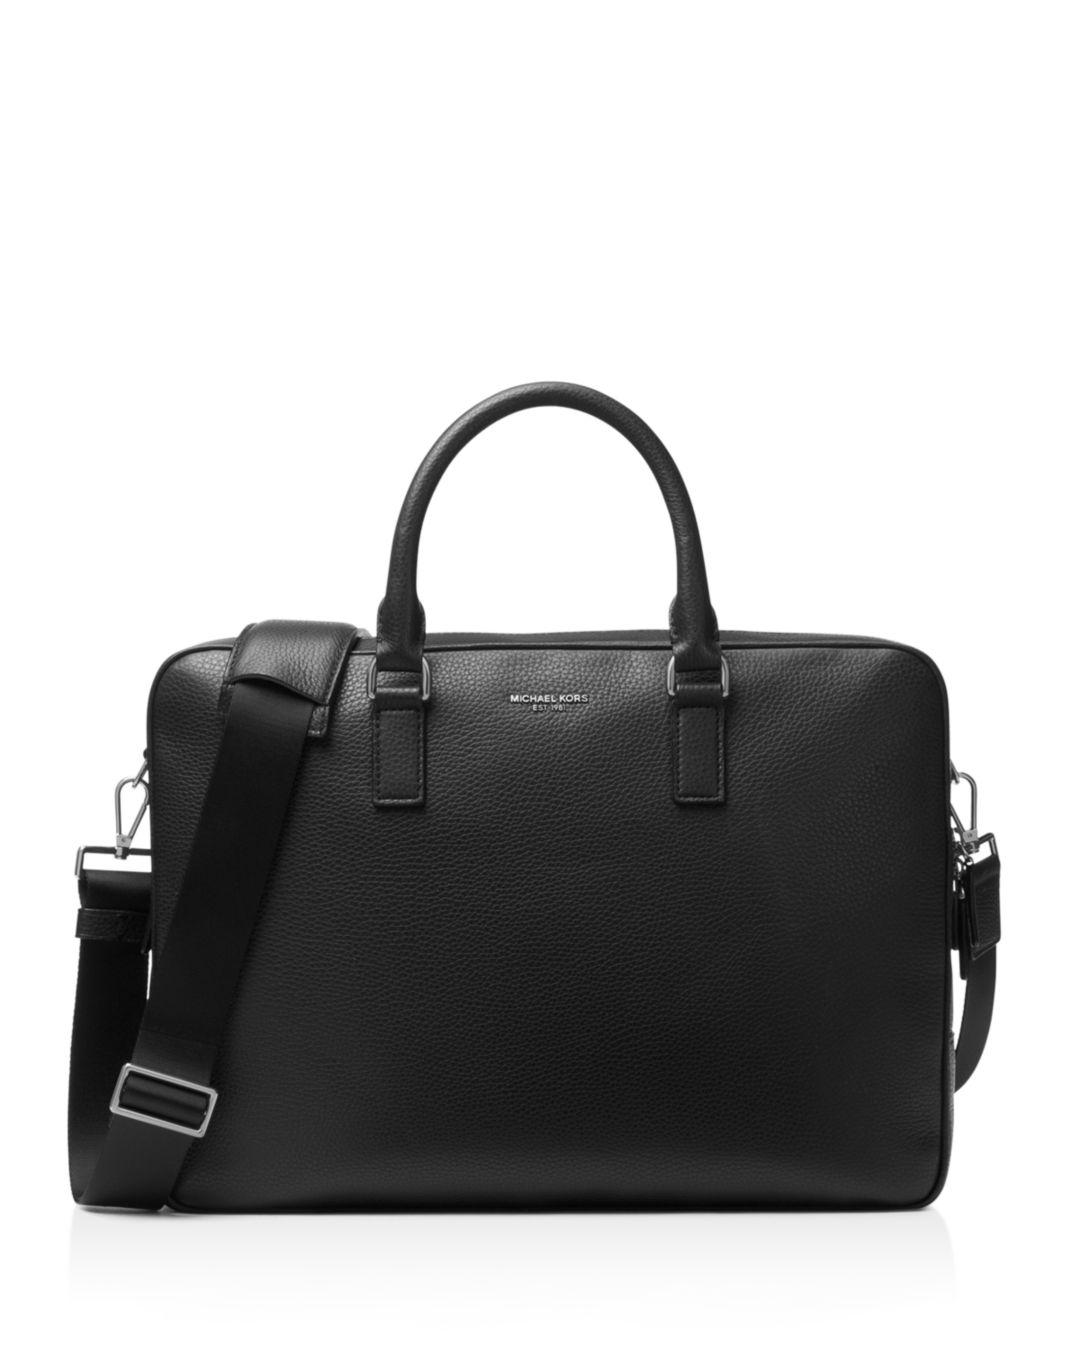 Michael Kors Pebbled Leather Briefcase in Black for Men - Lyst